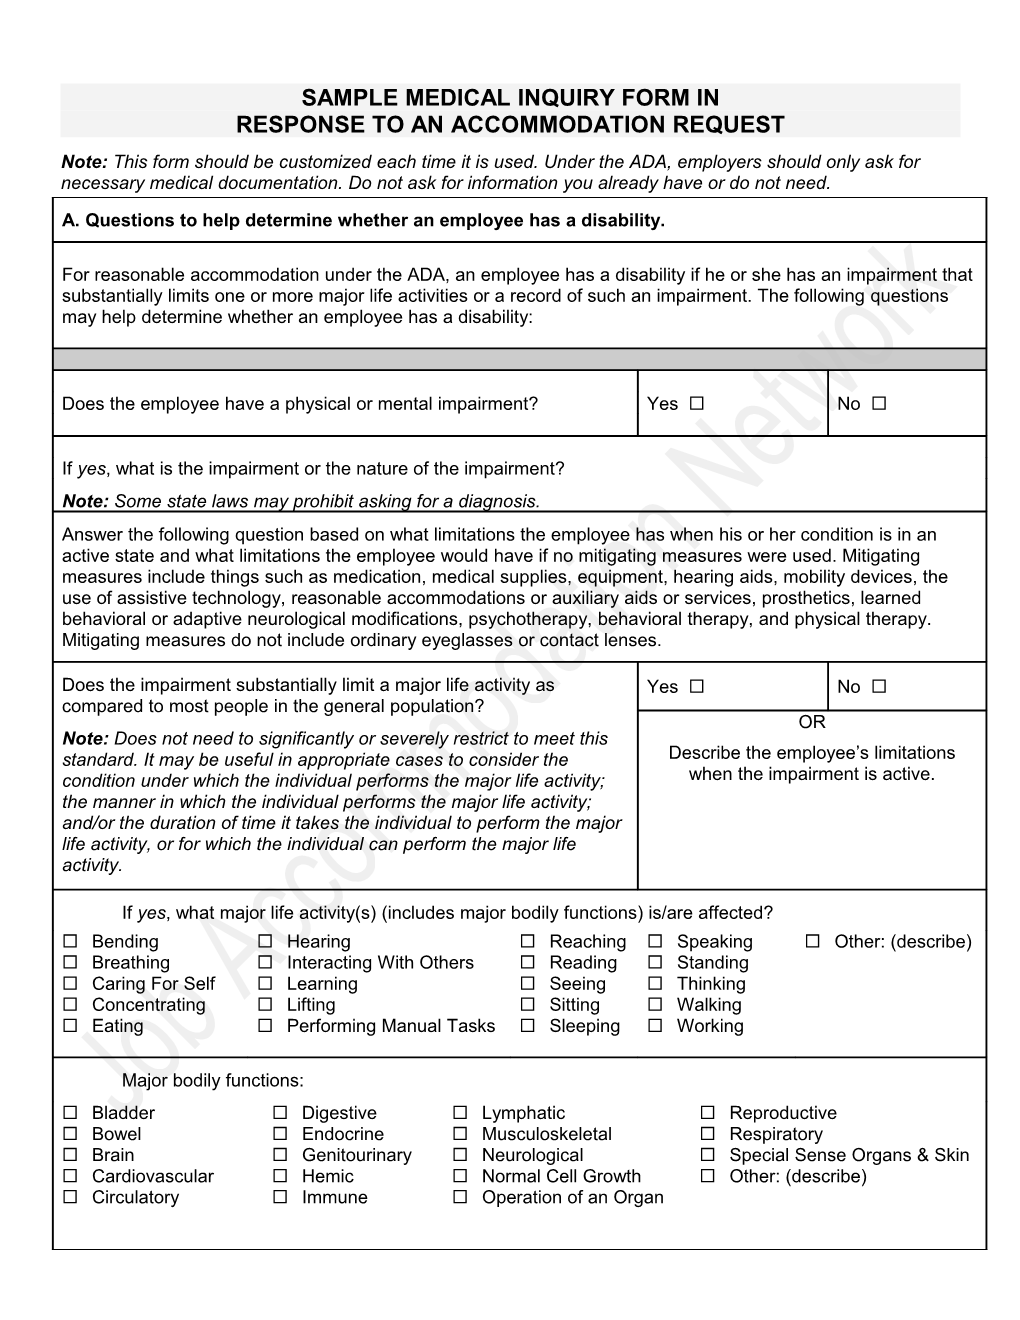 Sample Medical Inquiry Form In